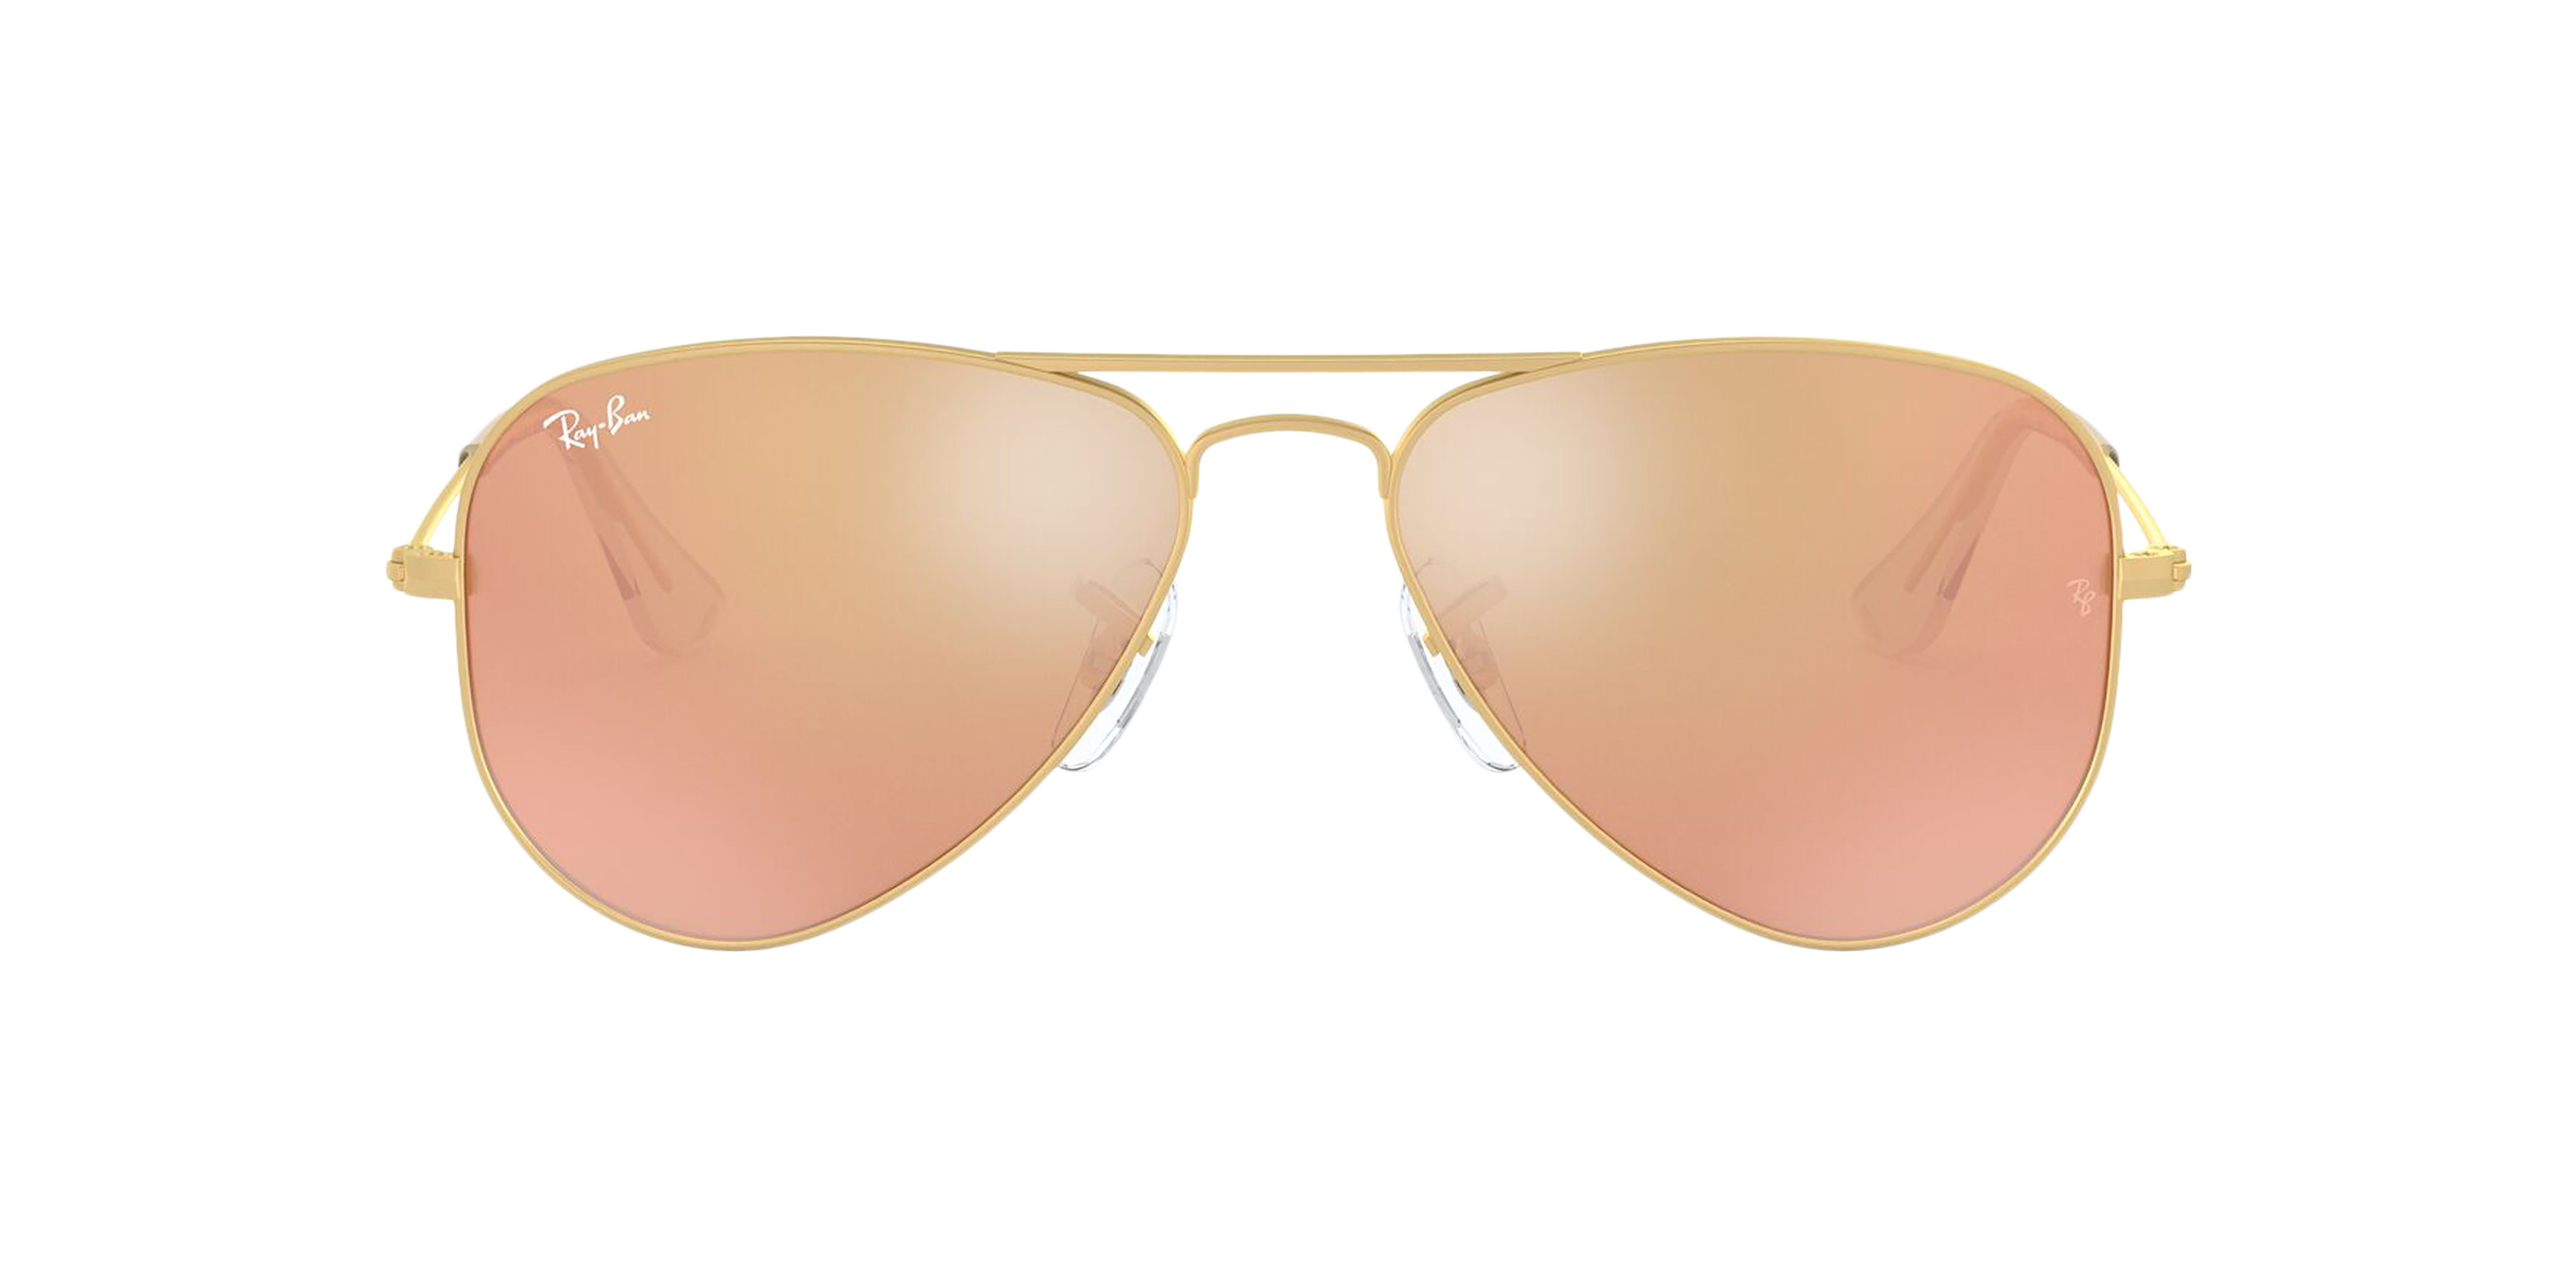 [products.image.front] Ray-Ban Junior Aviator RJ9506S 249/2Y